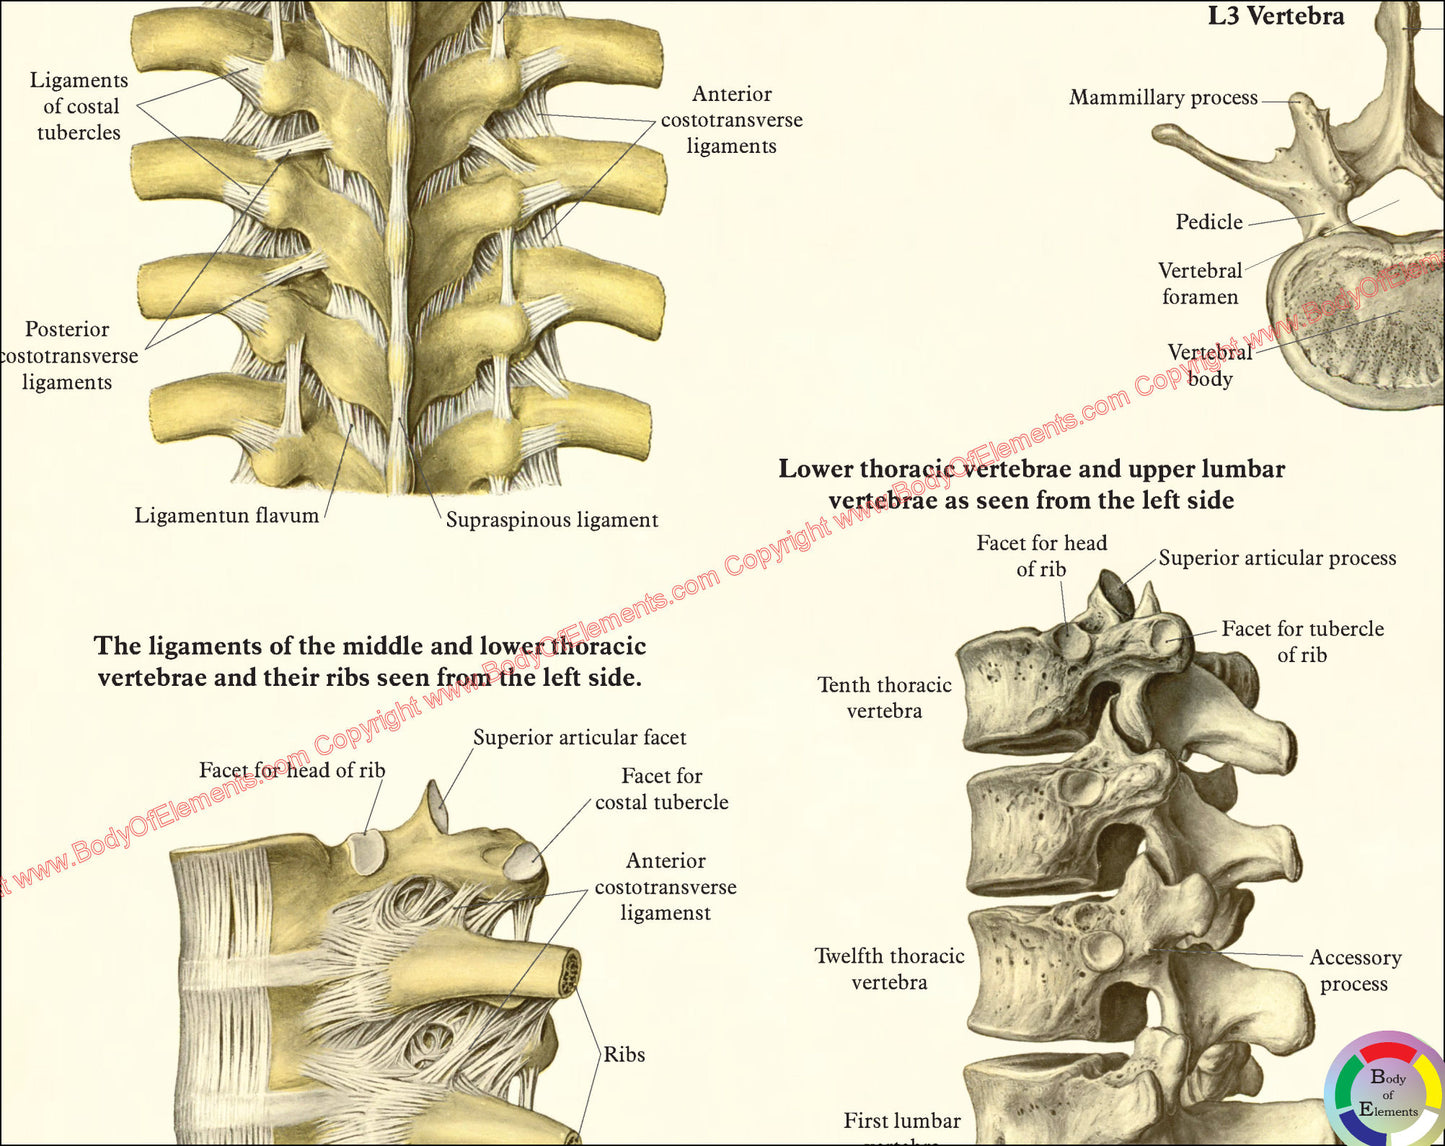 Ligaments of the thoracic spine poster